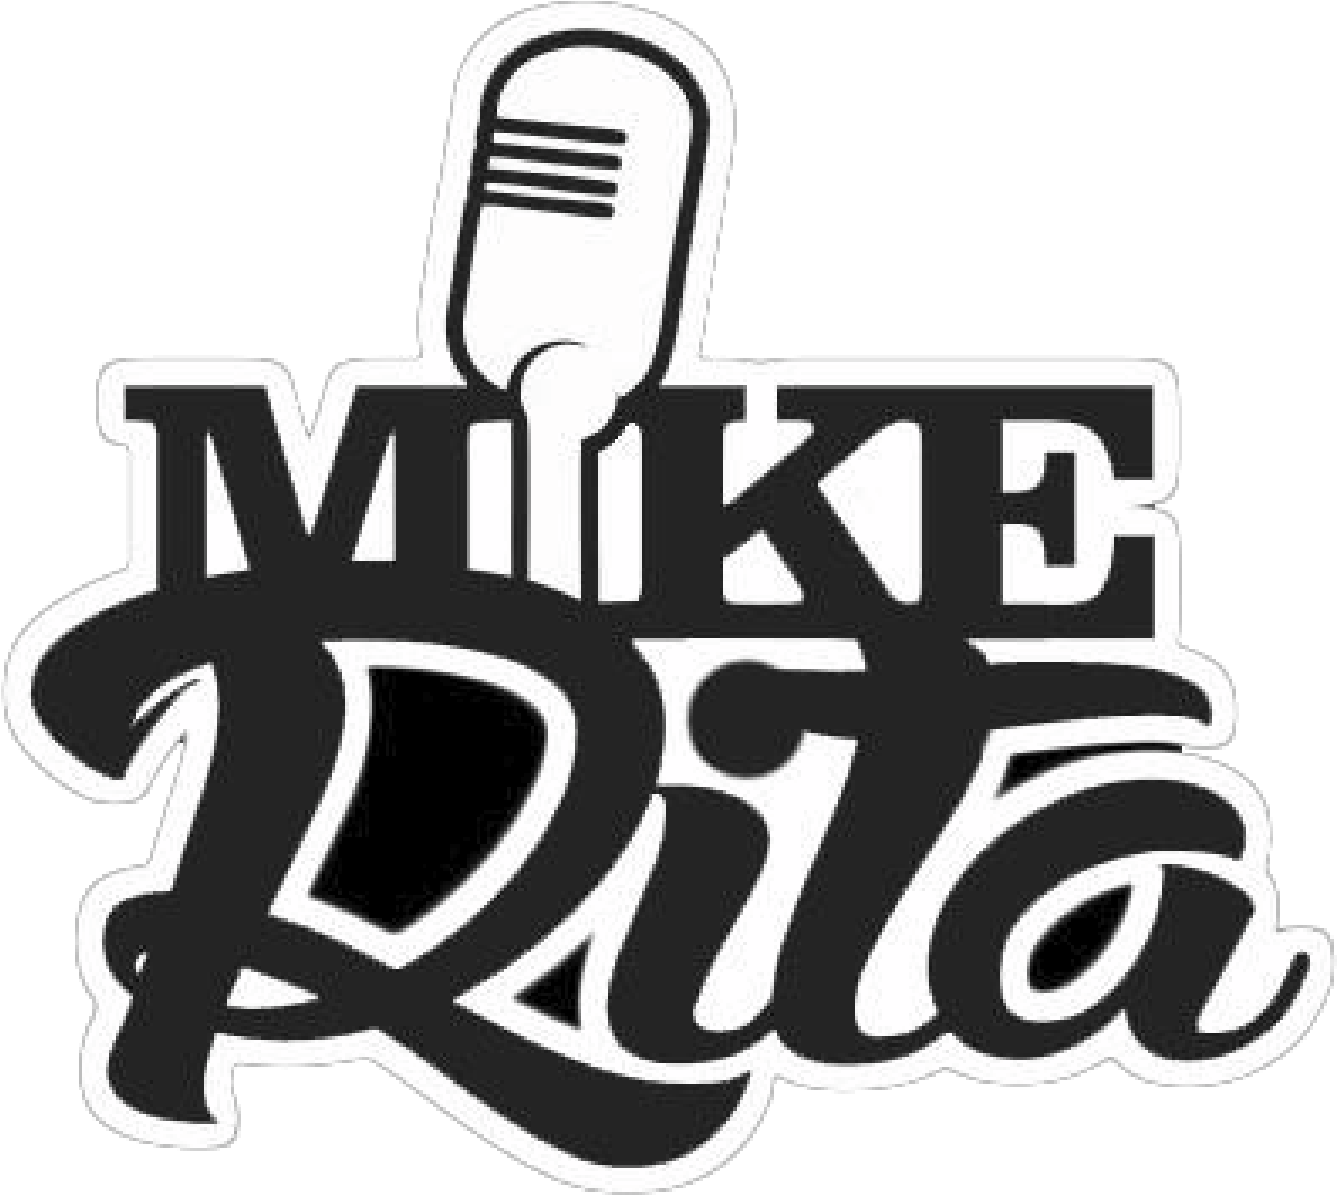 Welcome To The Official Website Of Mike Rita - Wicked Jazz Sounds Vol (1400x1258)